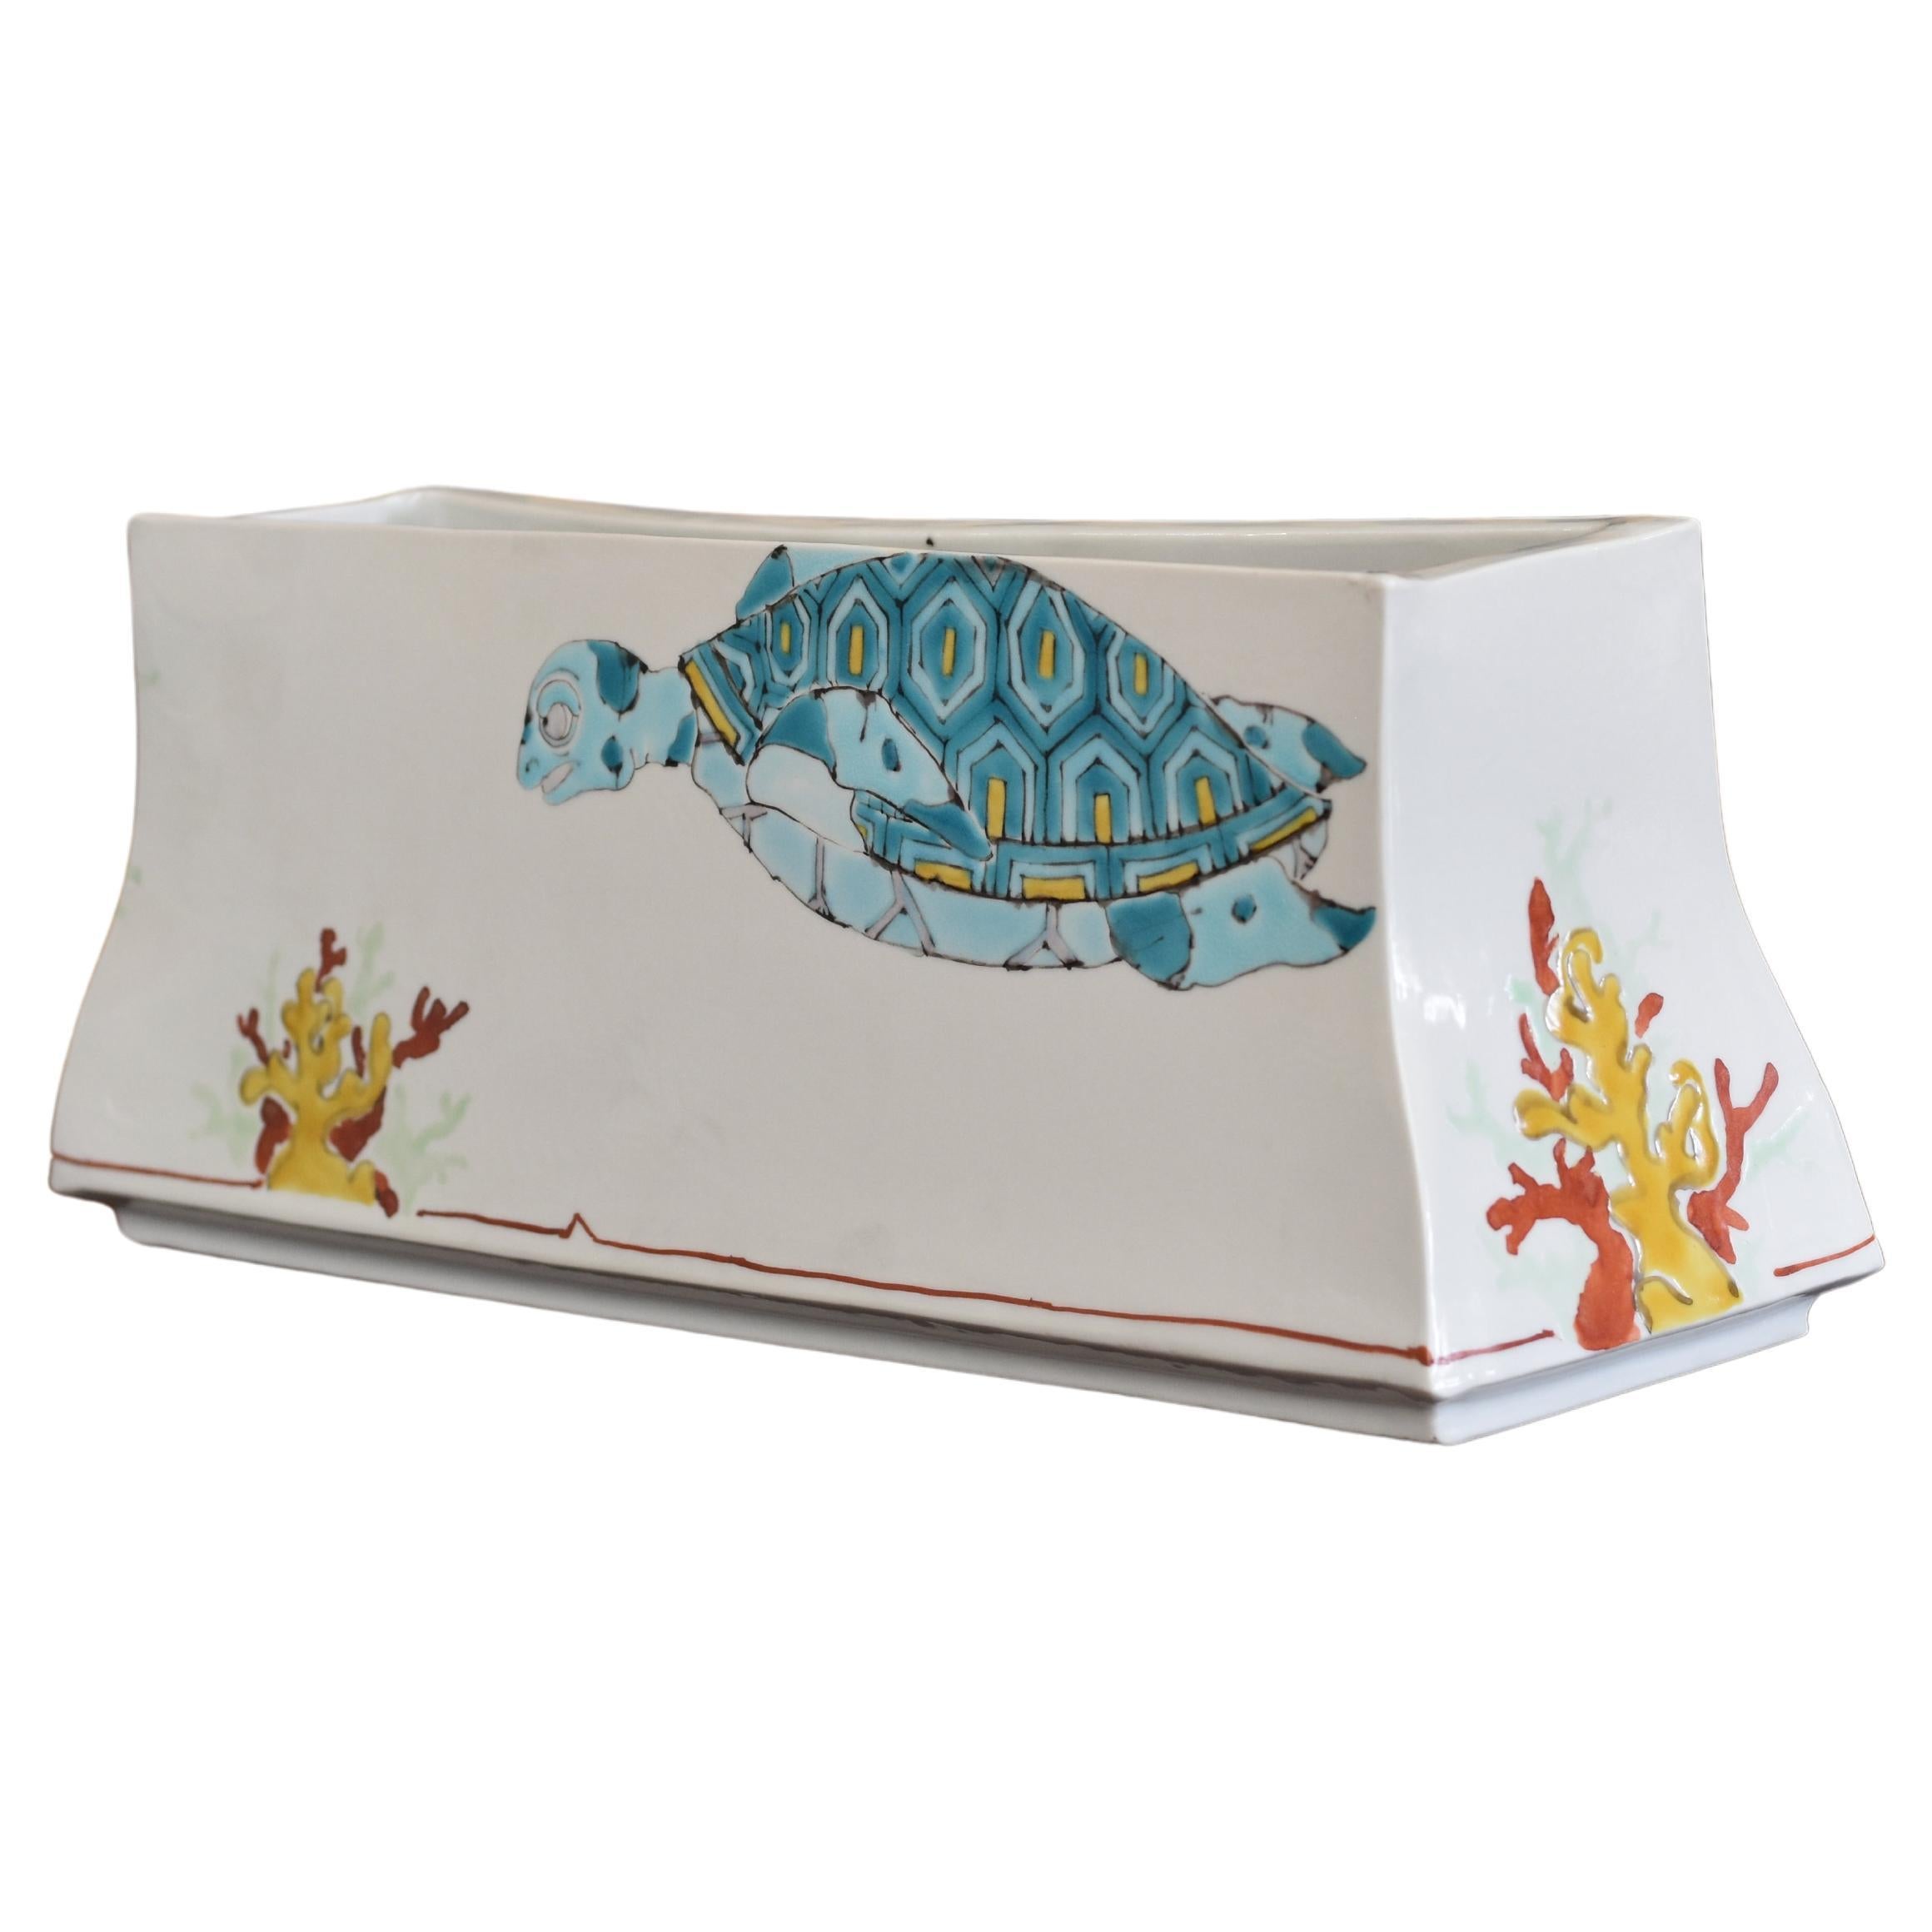 Extraordinary museum-quality Japanese contemporary signed decorative porcelain vase, stunningly hand painted on an elegant rectangular body in vivid hues of blue, yellow and red, with a unique interpretation of sea turtle. This highly acclaimed